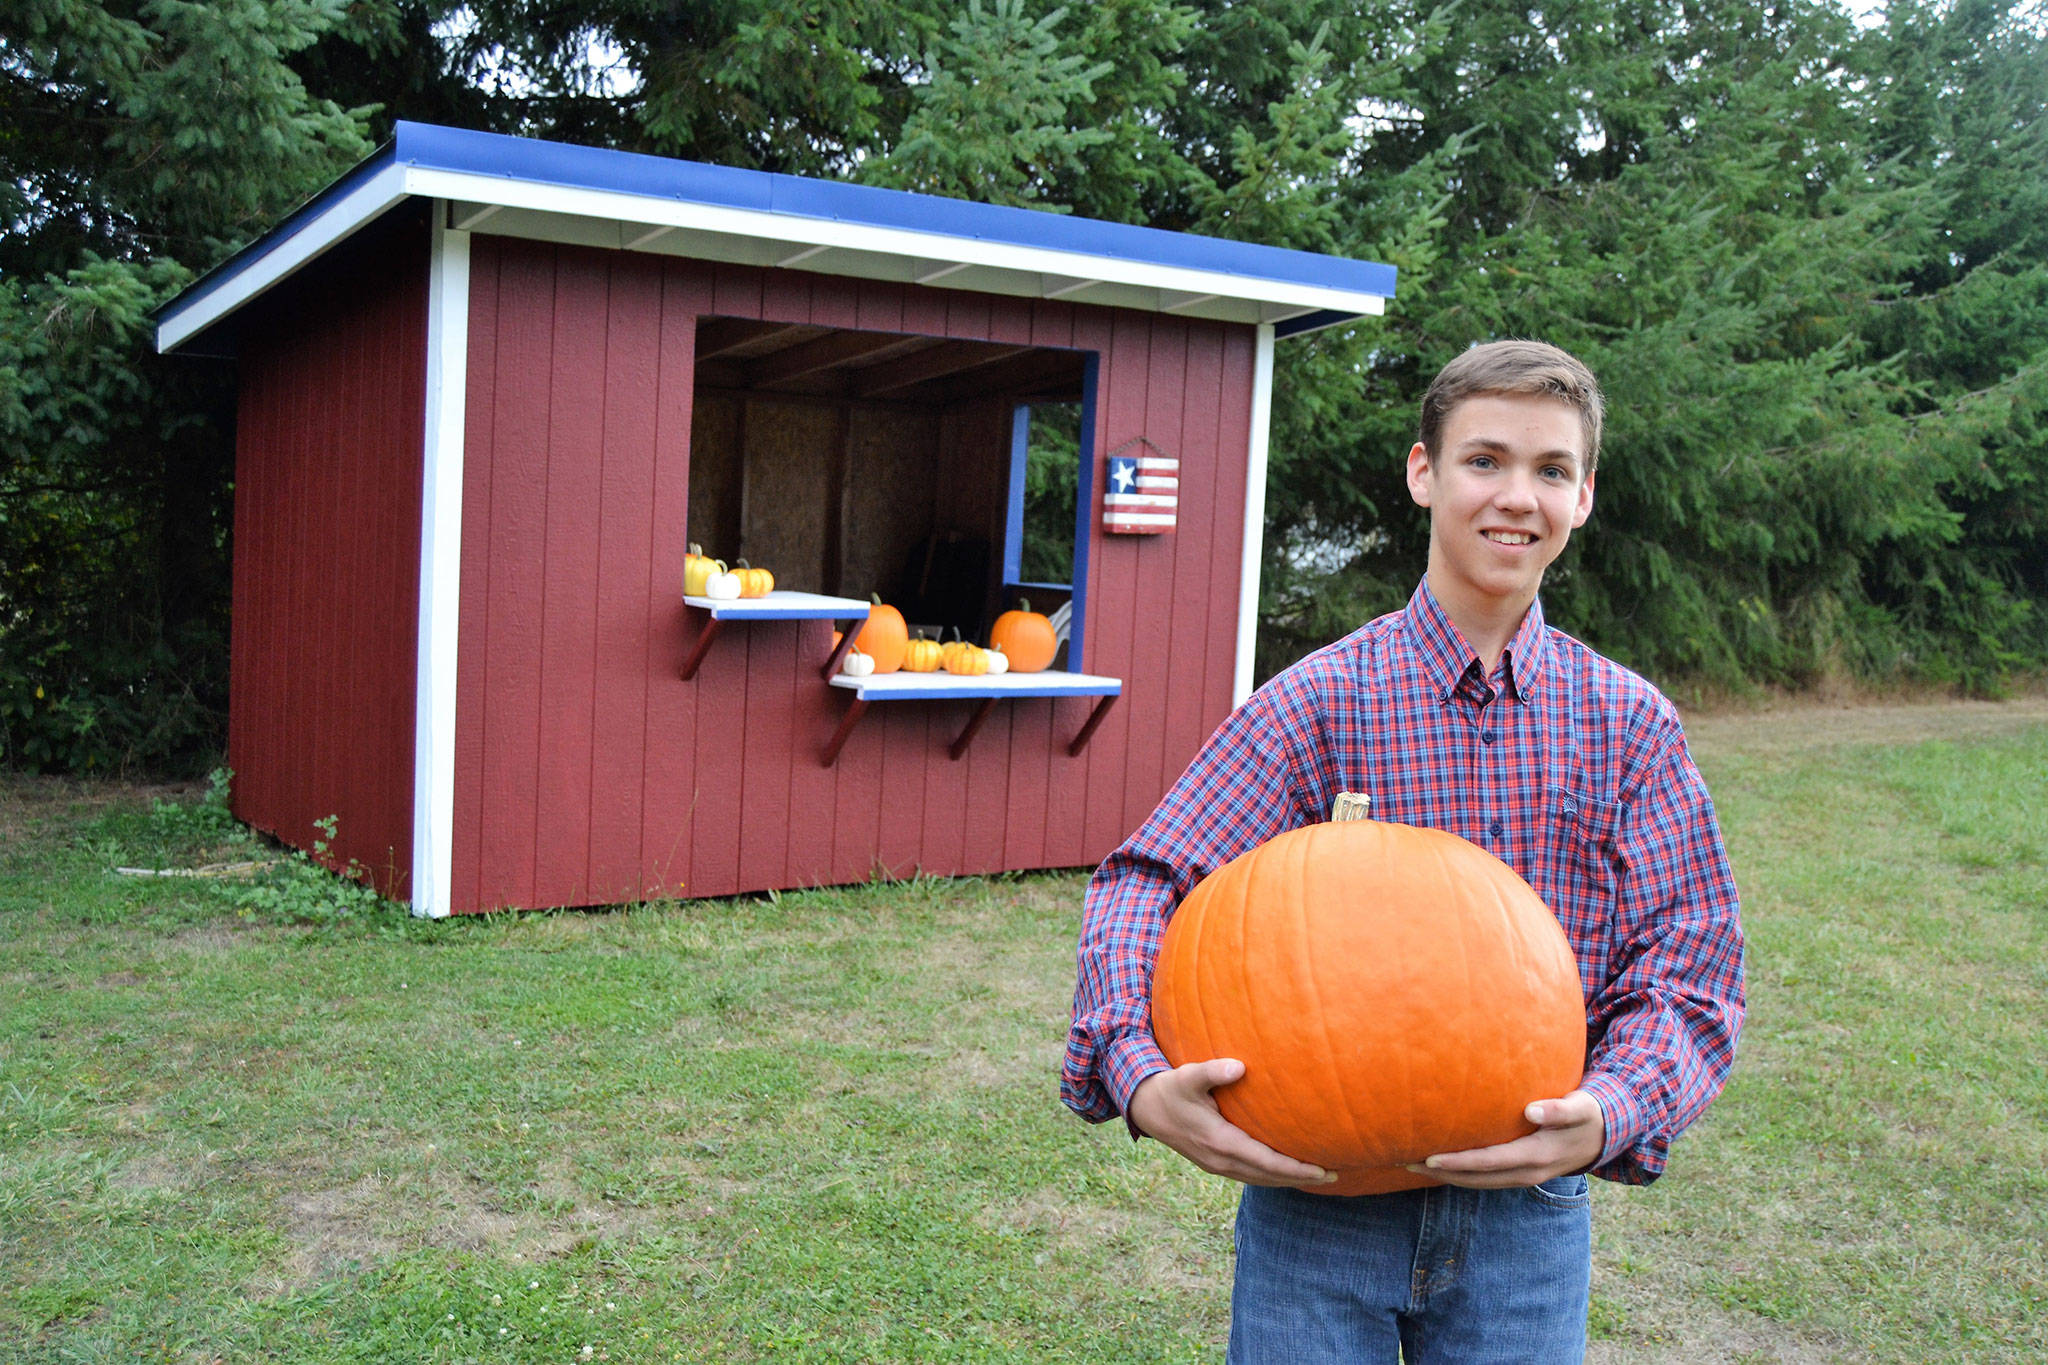 Carson Holt holds a pumpkin outside of the stand he plans to sell pumpkins from Saturday at the intersection of Old Olympic Highway and Knutsen Farm Road. (Matthew Nash/Olympic Peninsula News Group)